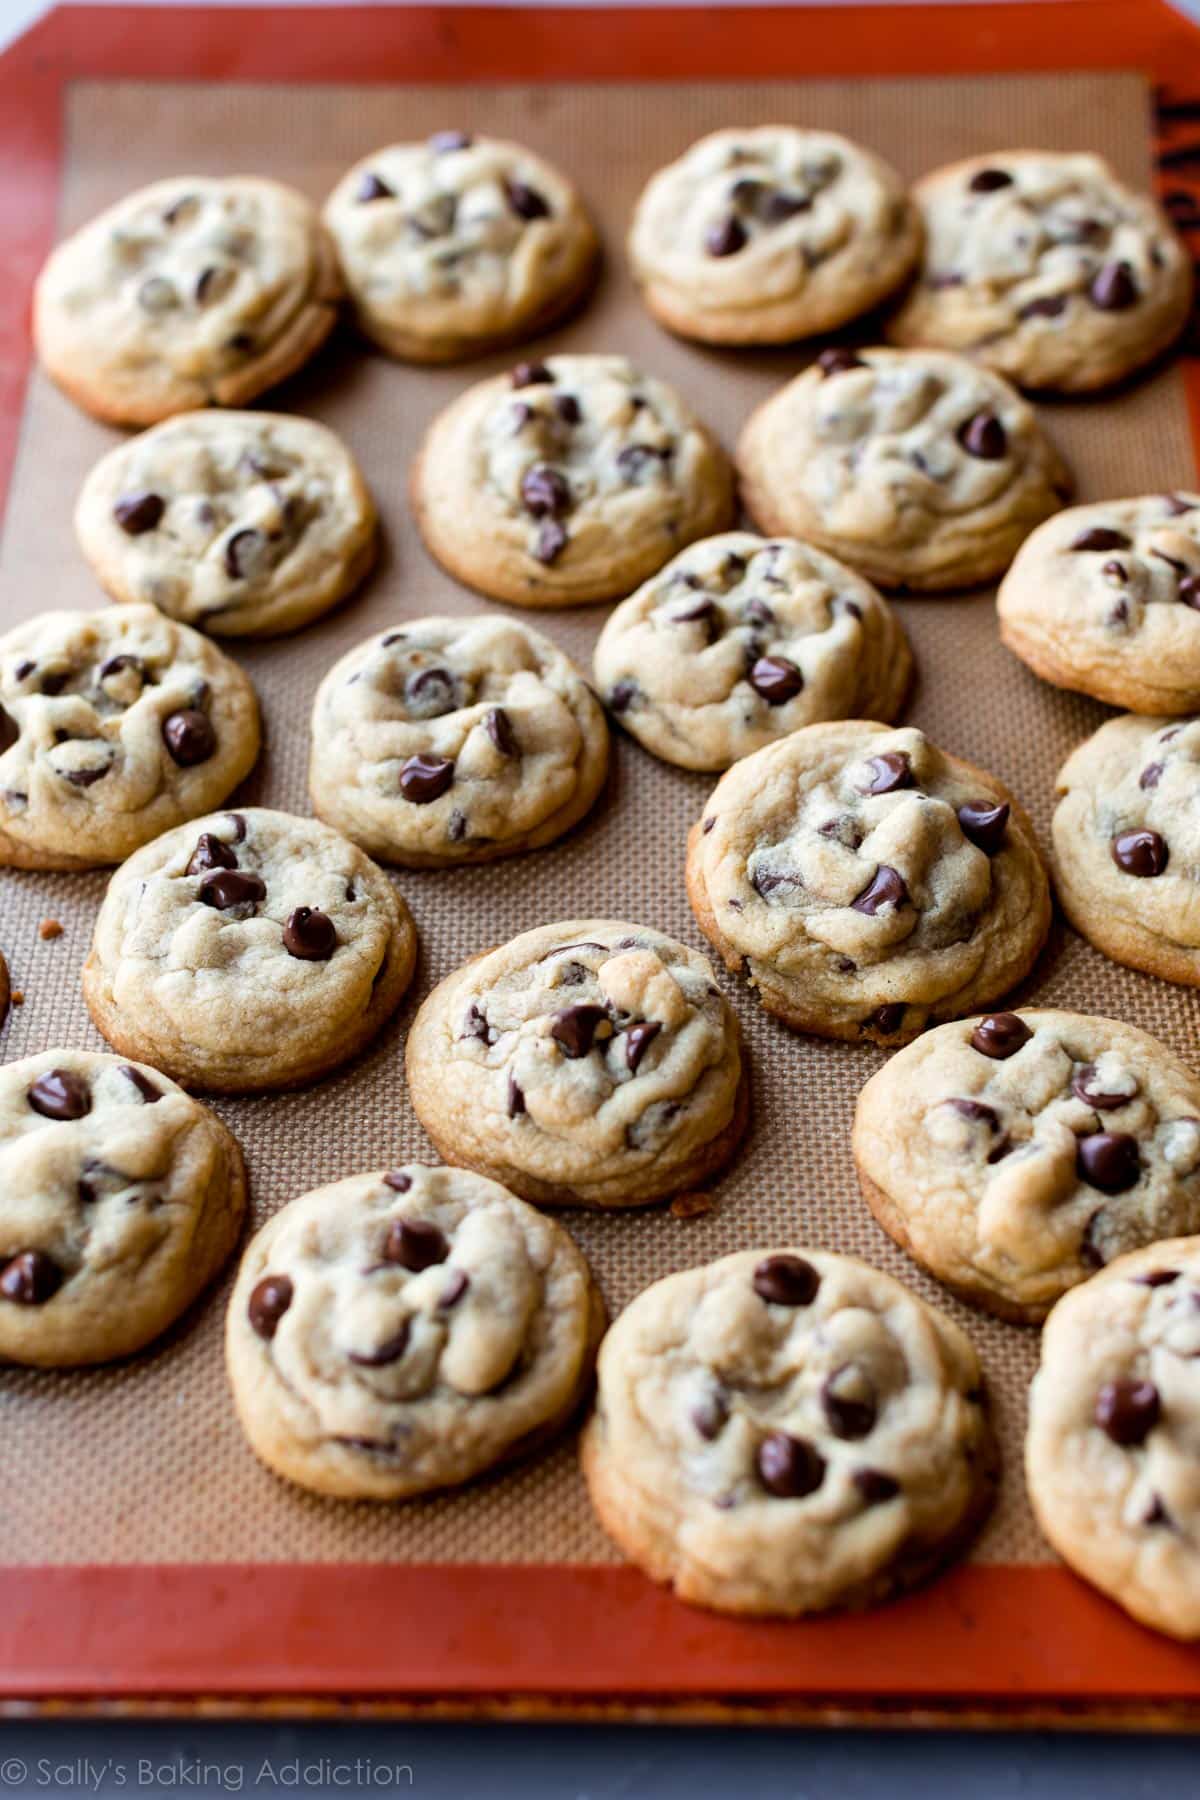 Warm chocolate chip cookies on silpat